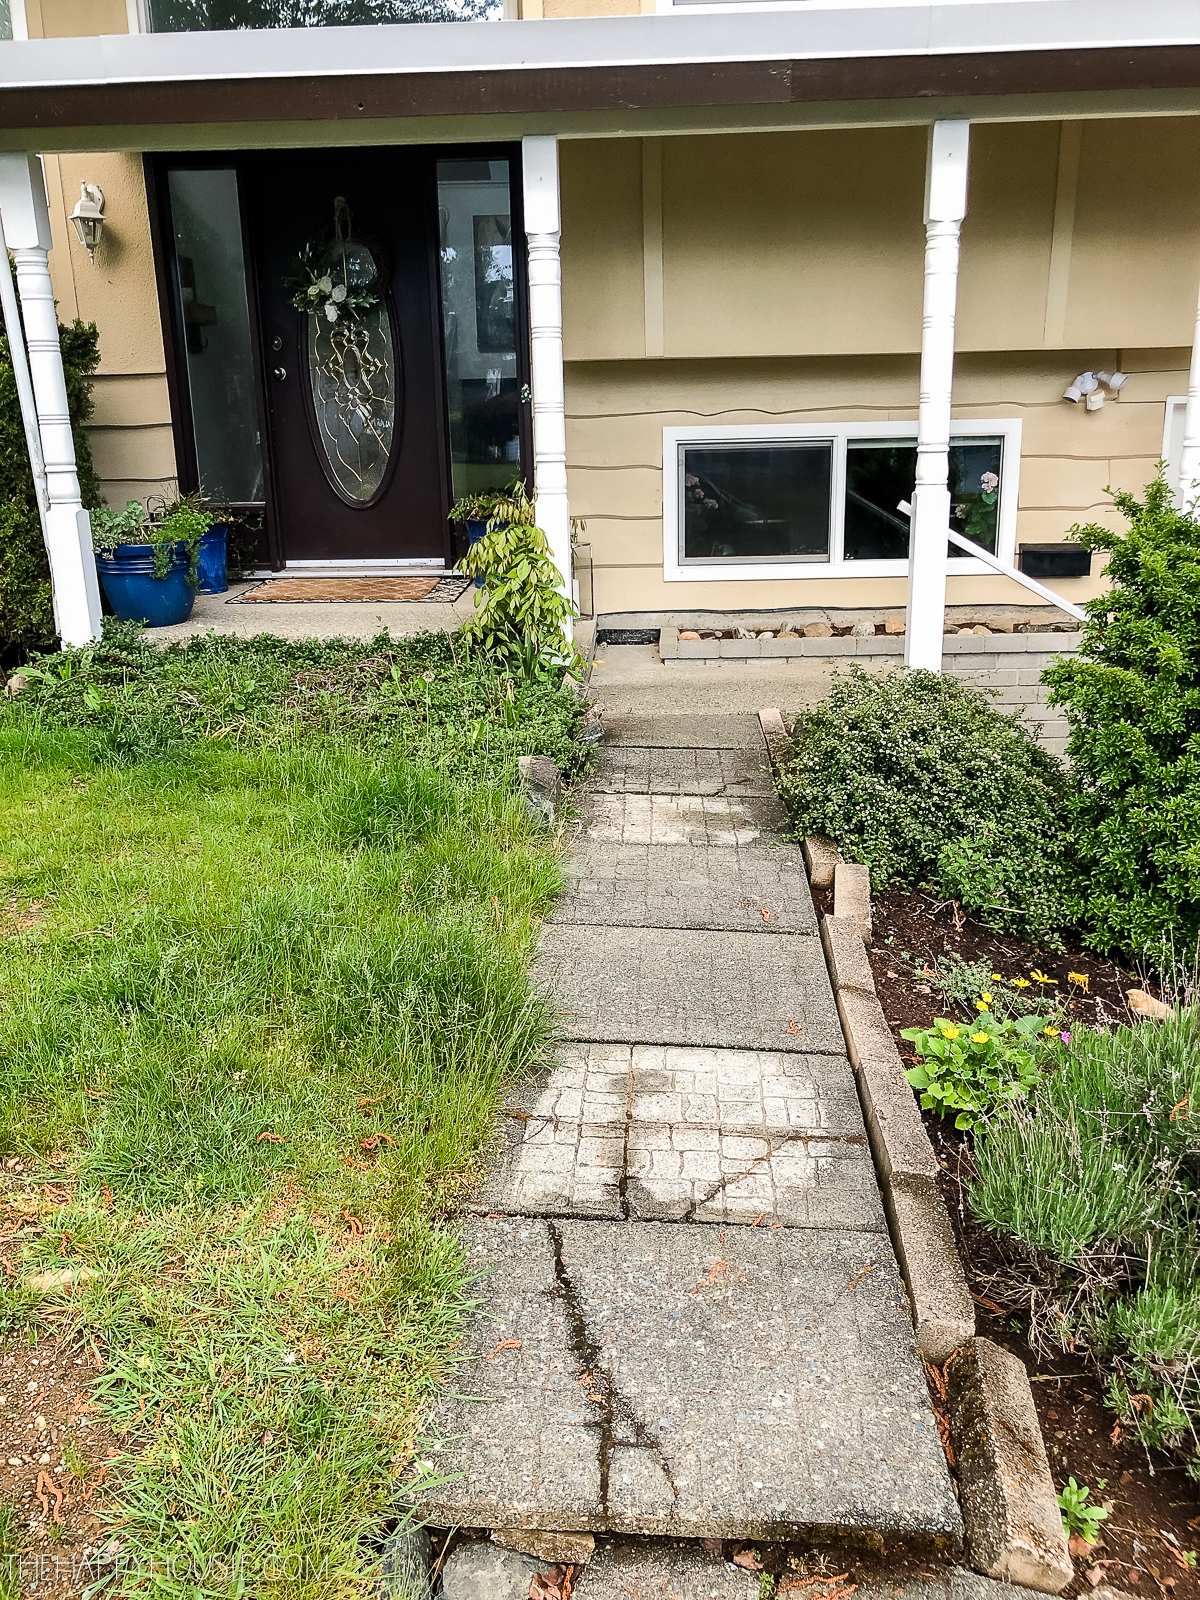 The path to the house with cracked and uneven slabs of concrete.